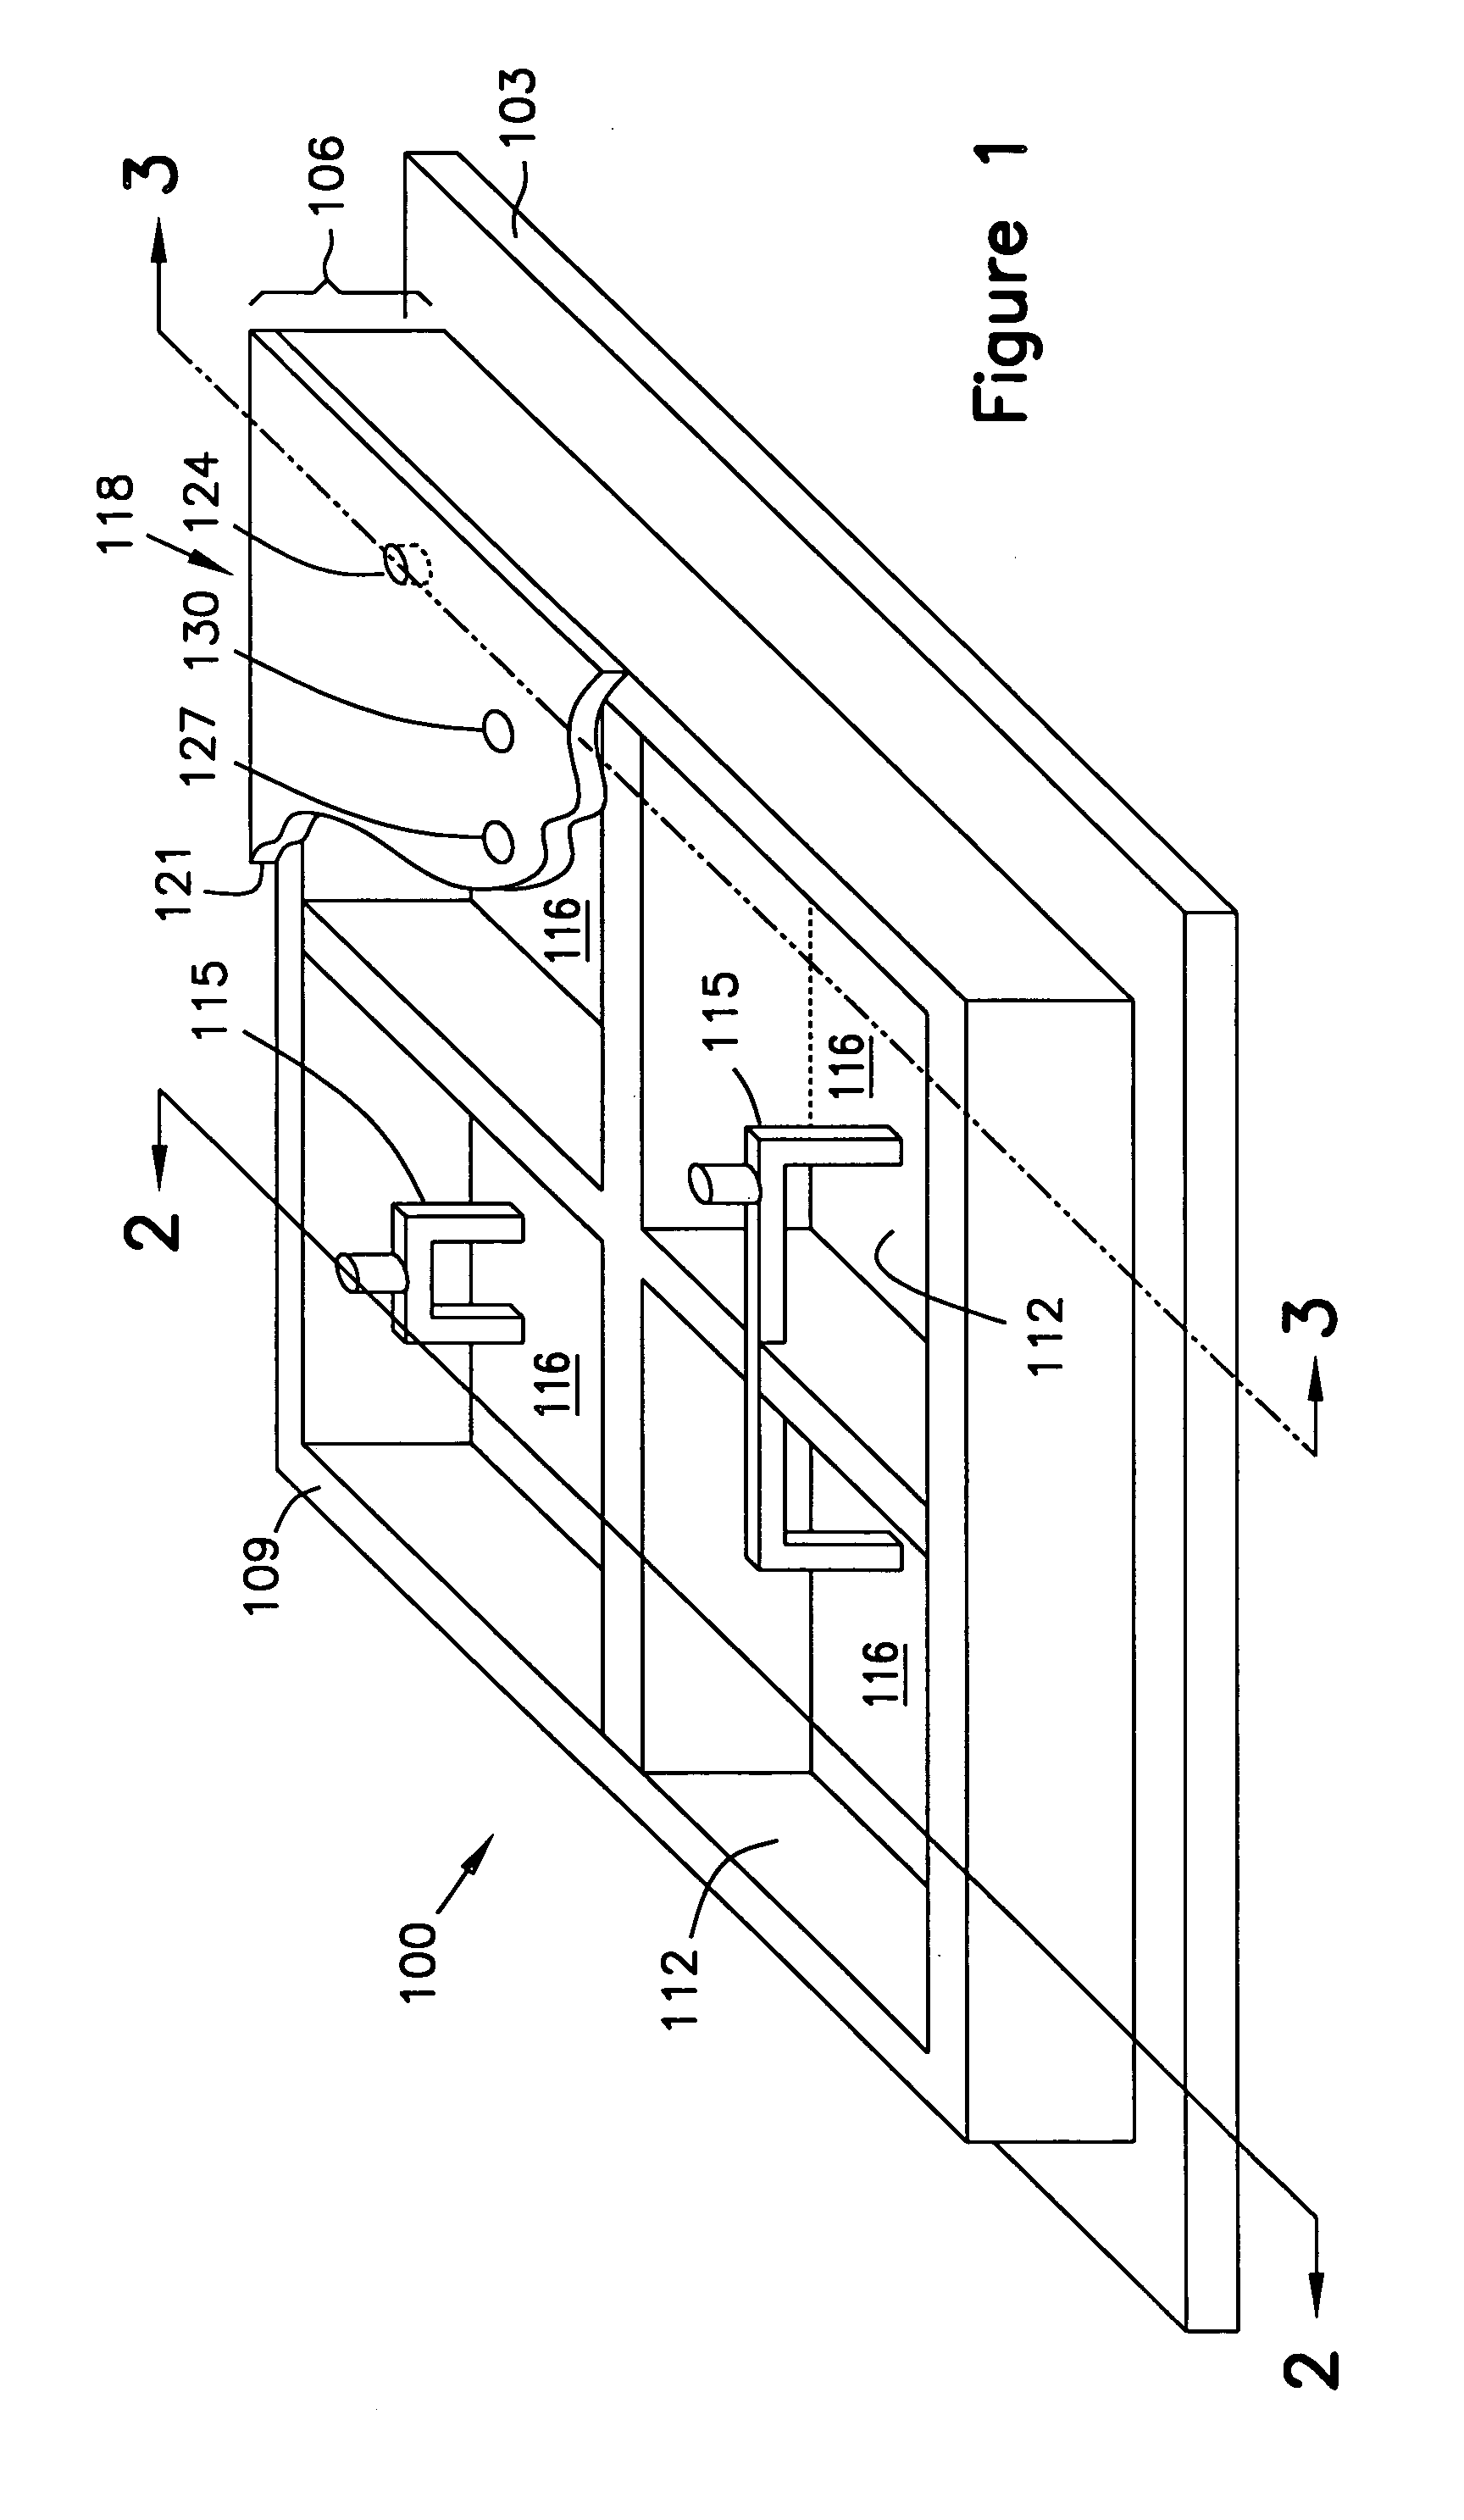 Packaging of electronic chips with air-bridge structures